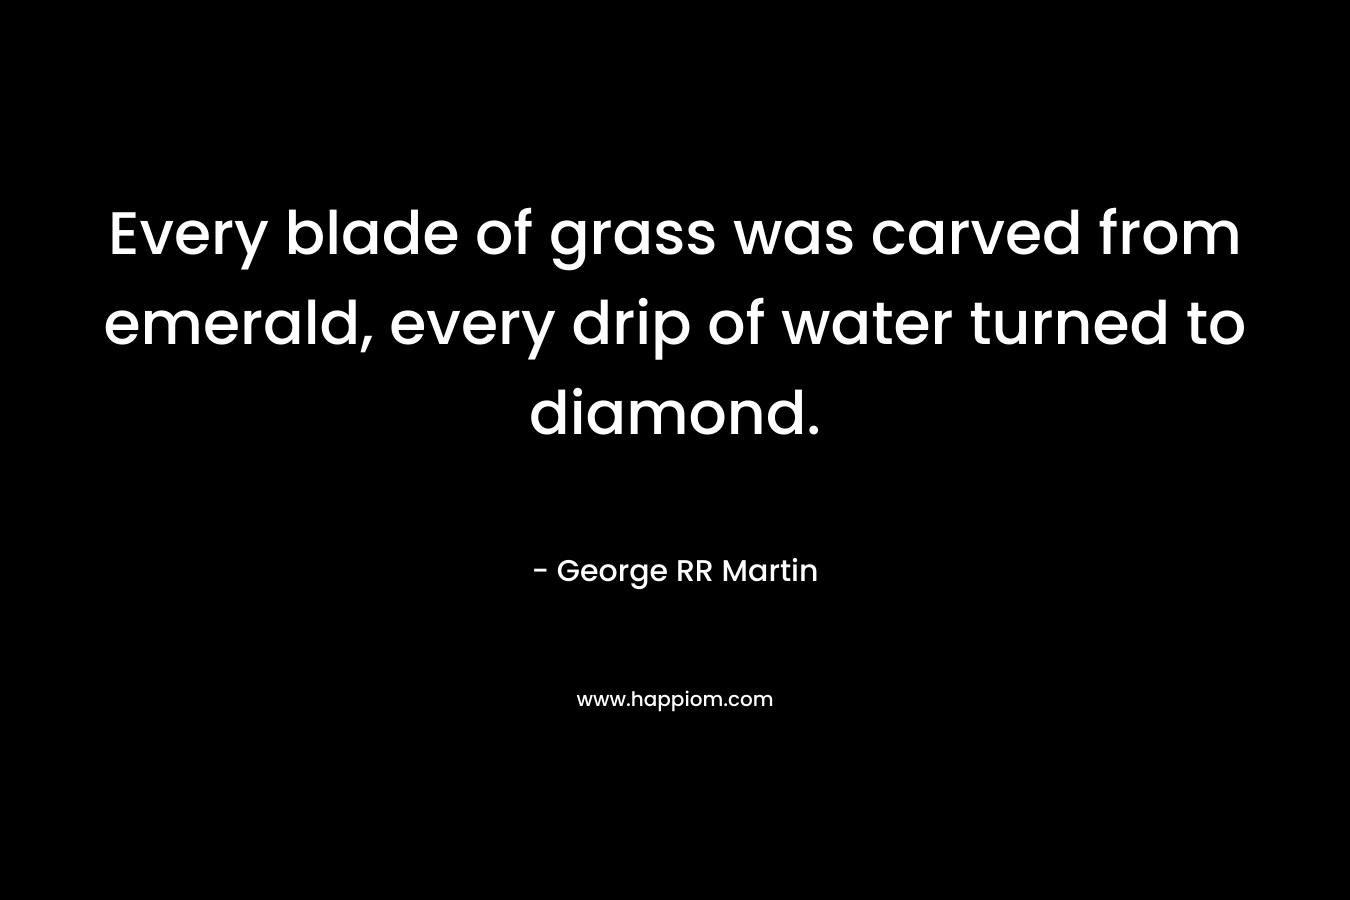 Every blade of grass was carved from emerald, every drip of water turned to diamond. – George RR Martin